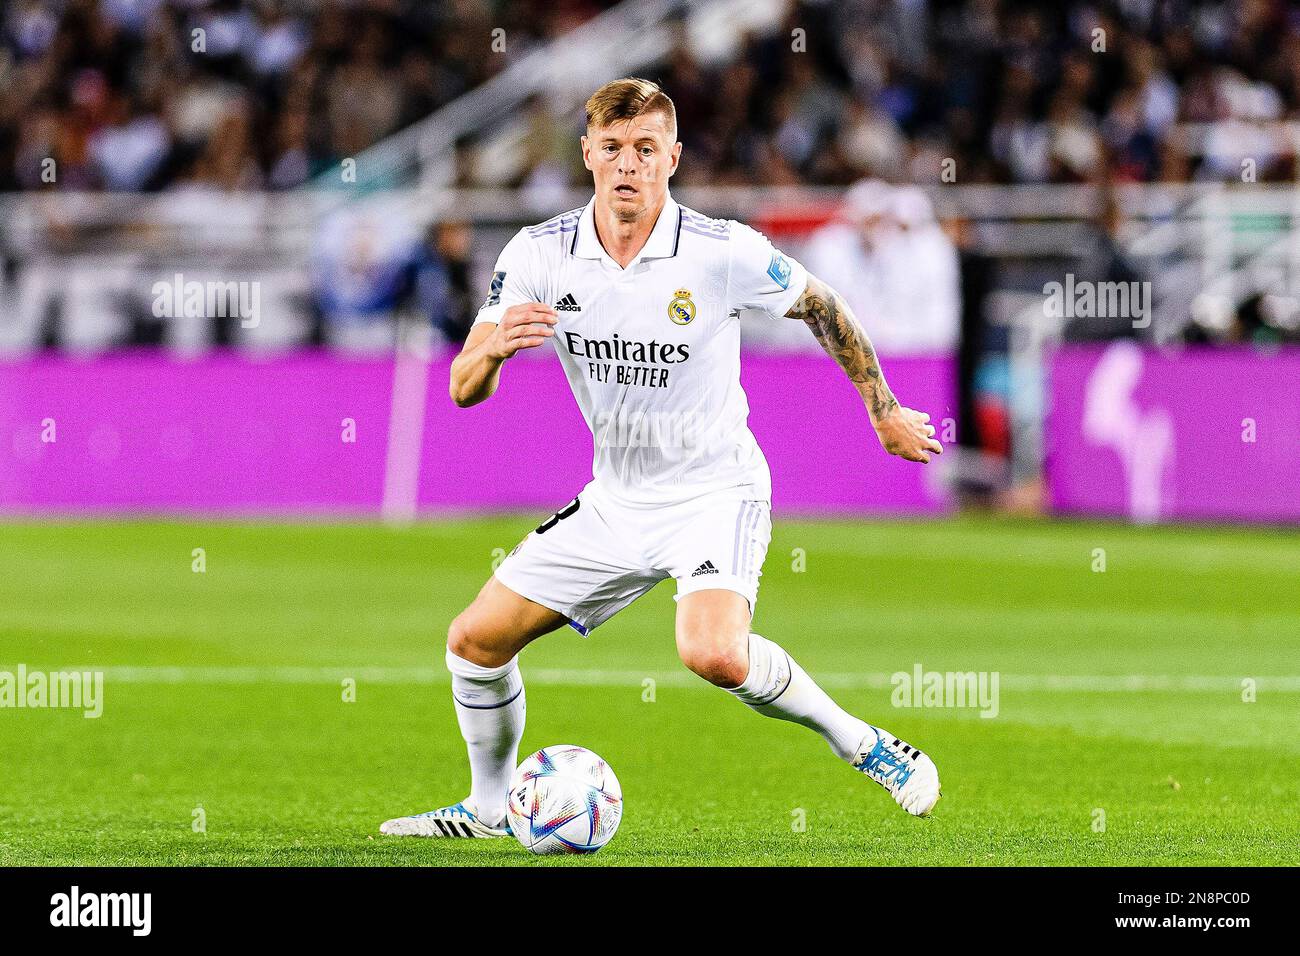 Rabat, Morocco. 11th Feb, 2023. Prince Moulay Abdellah Stadium Toni Kroos of Real Madrid before the match between Real Madrid and Al Hilal, valid for the 2022 FIFA Club World Cup Final, held at the Prince Moulay Abdellah Stadium in Rabat, Morocco (Richard Callis/SPP) Credit: SPP Sport Press Photo. /Alamy Live News Stock Photo